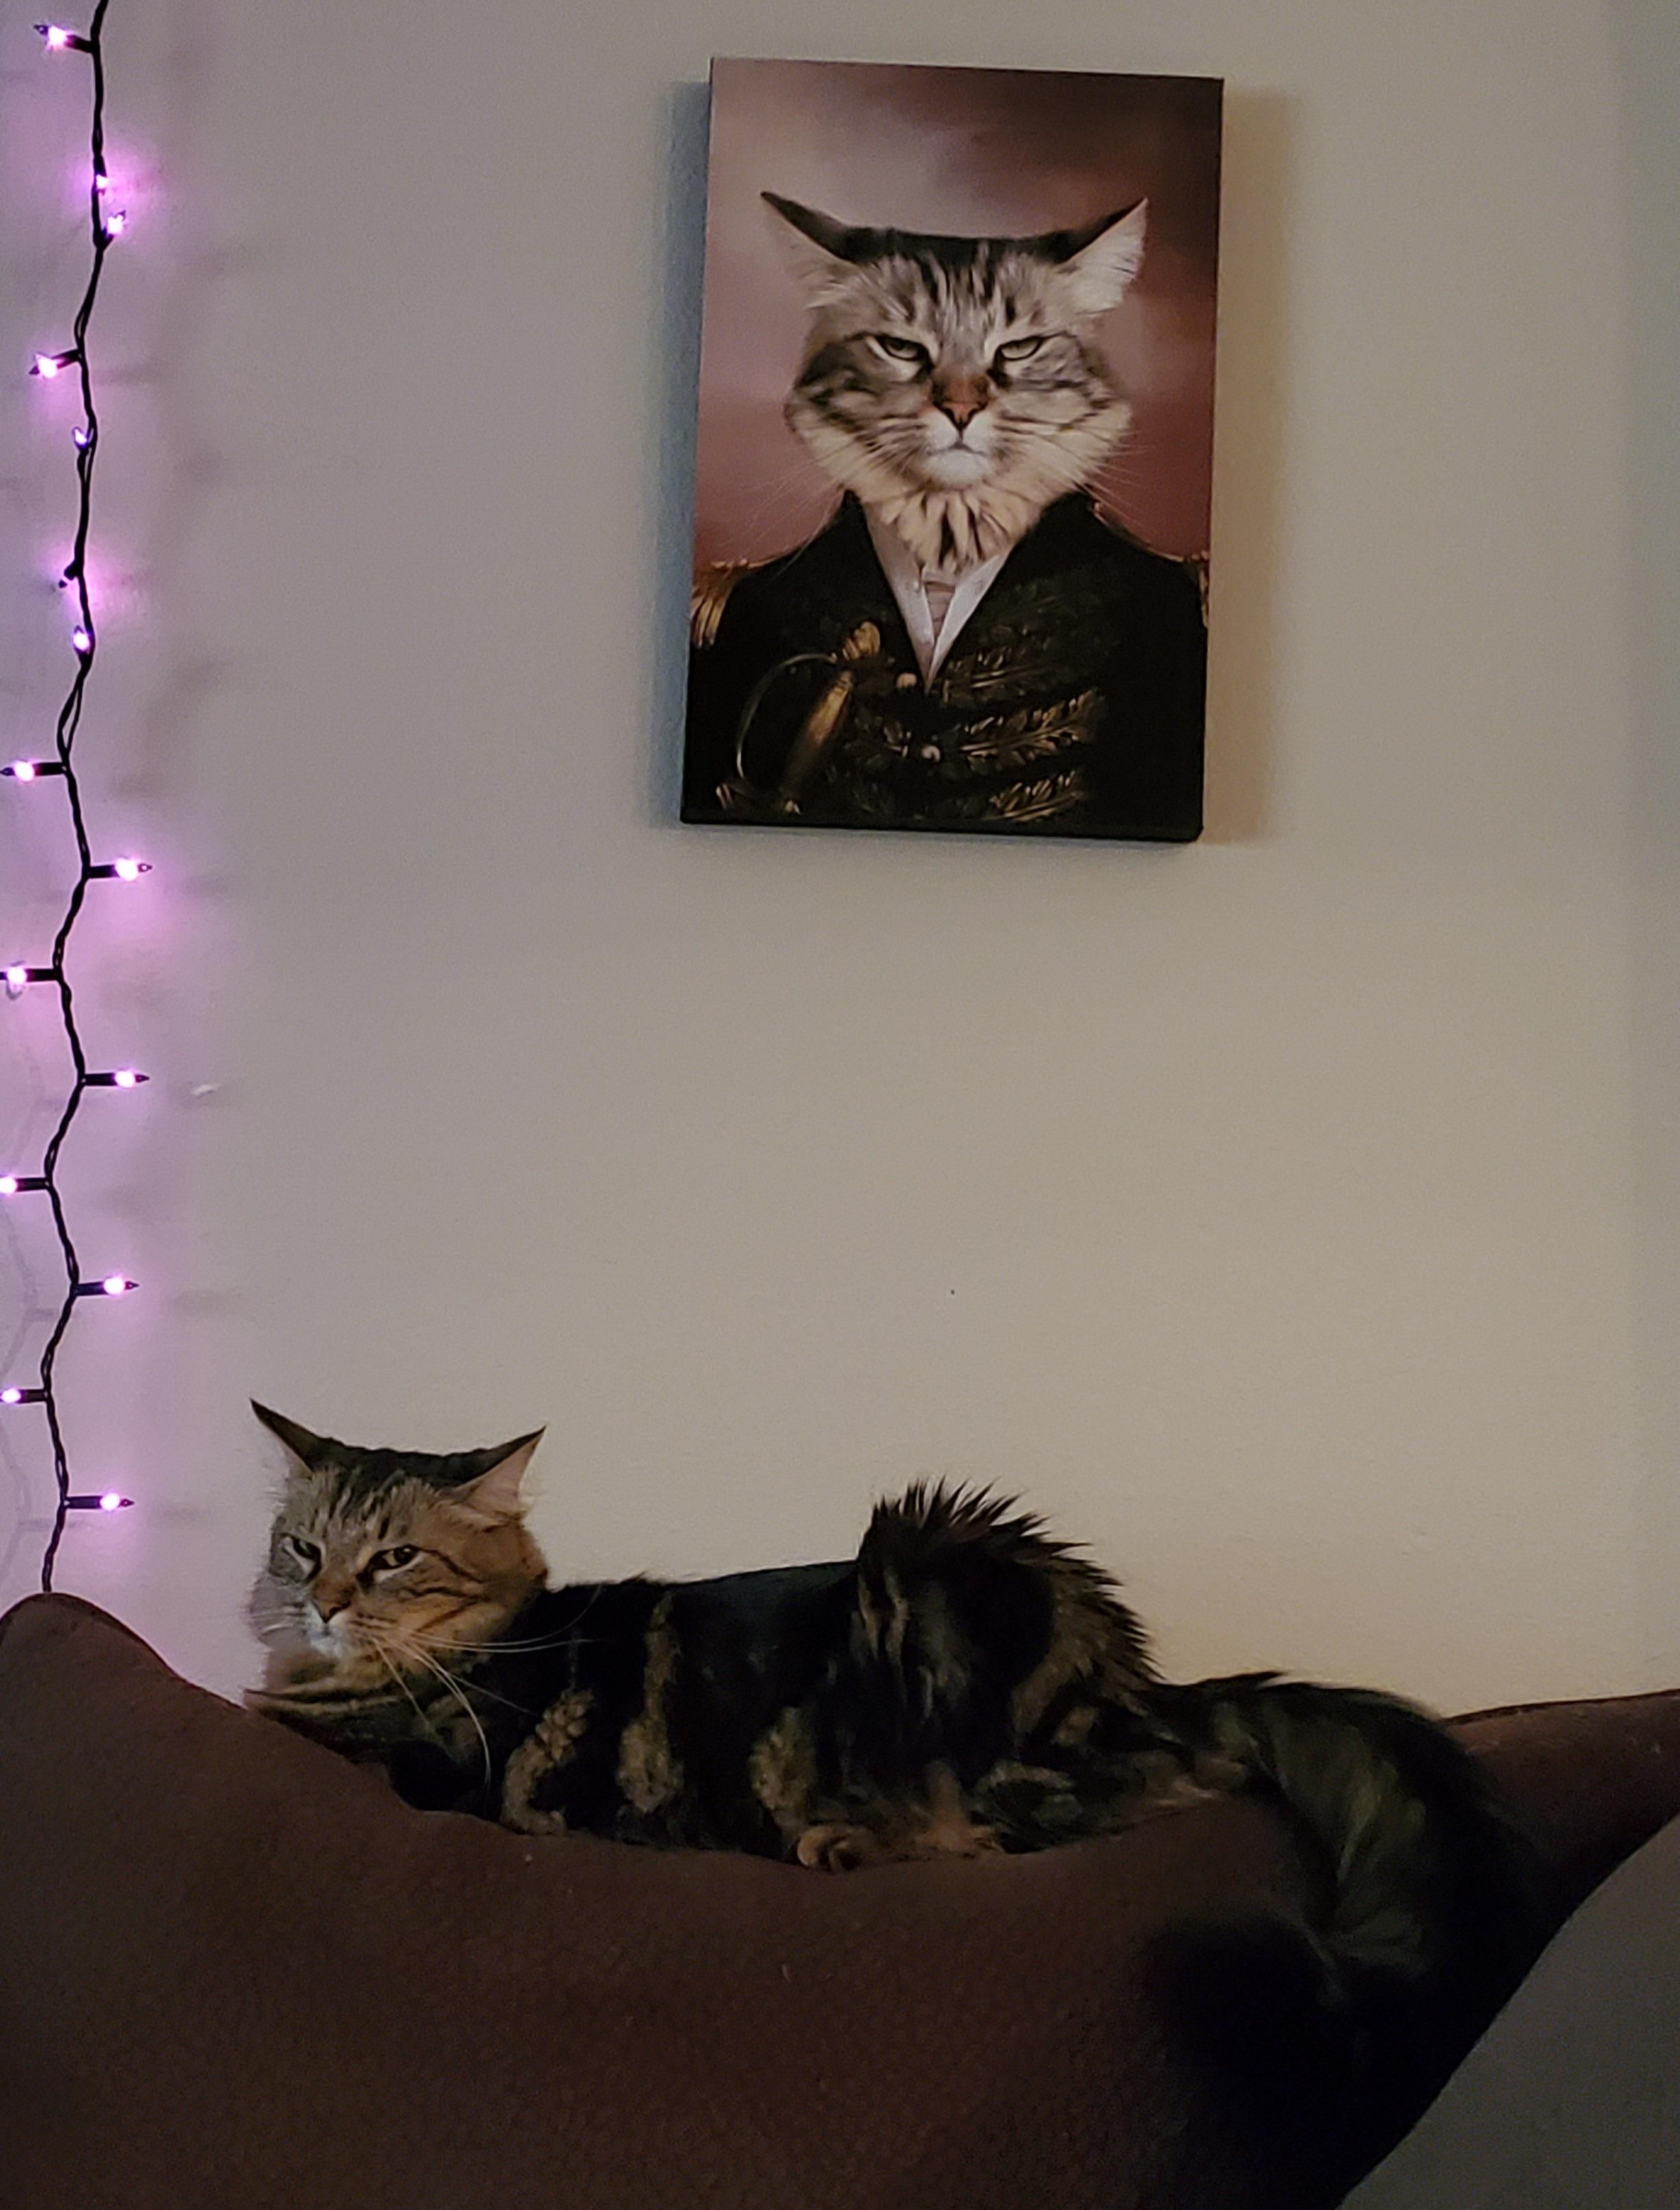 Do you think he likes his self portrait?